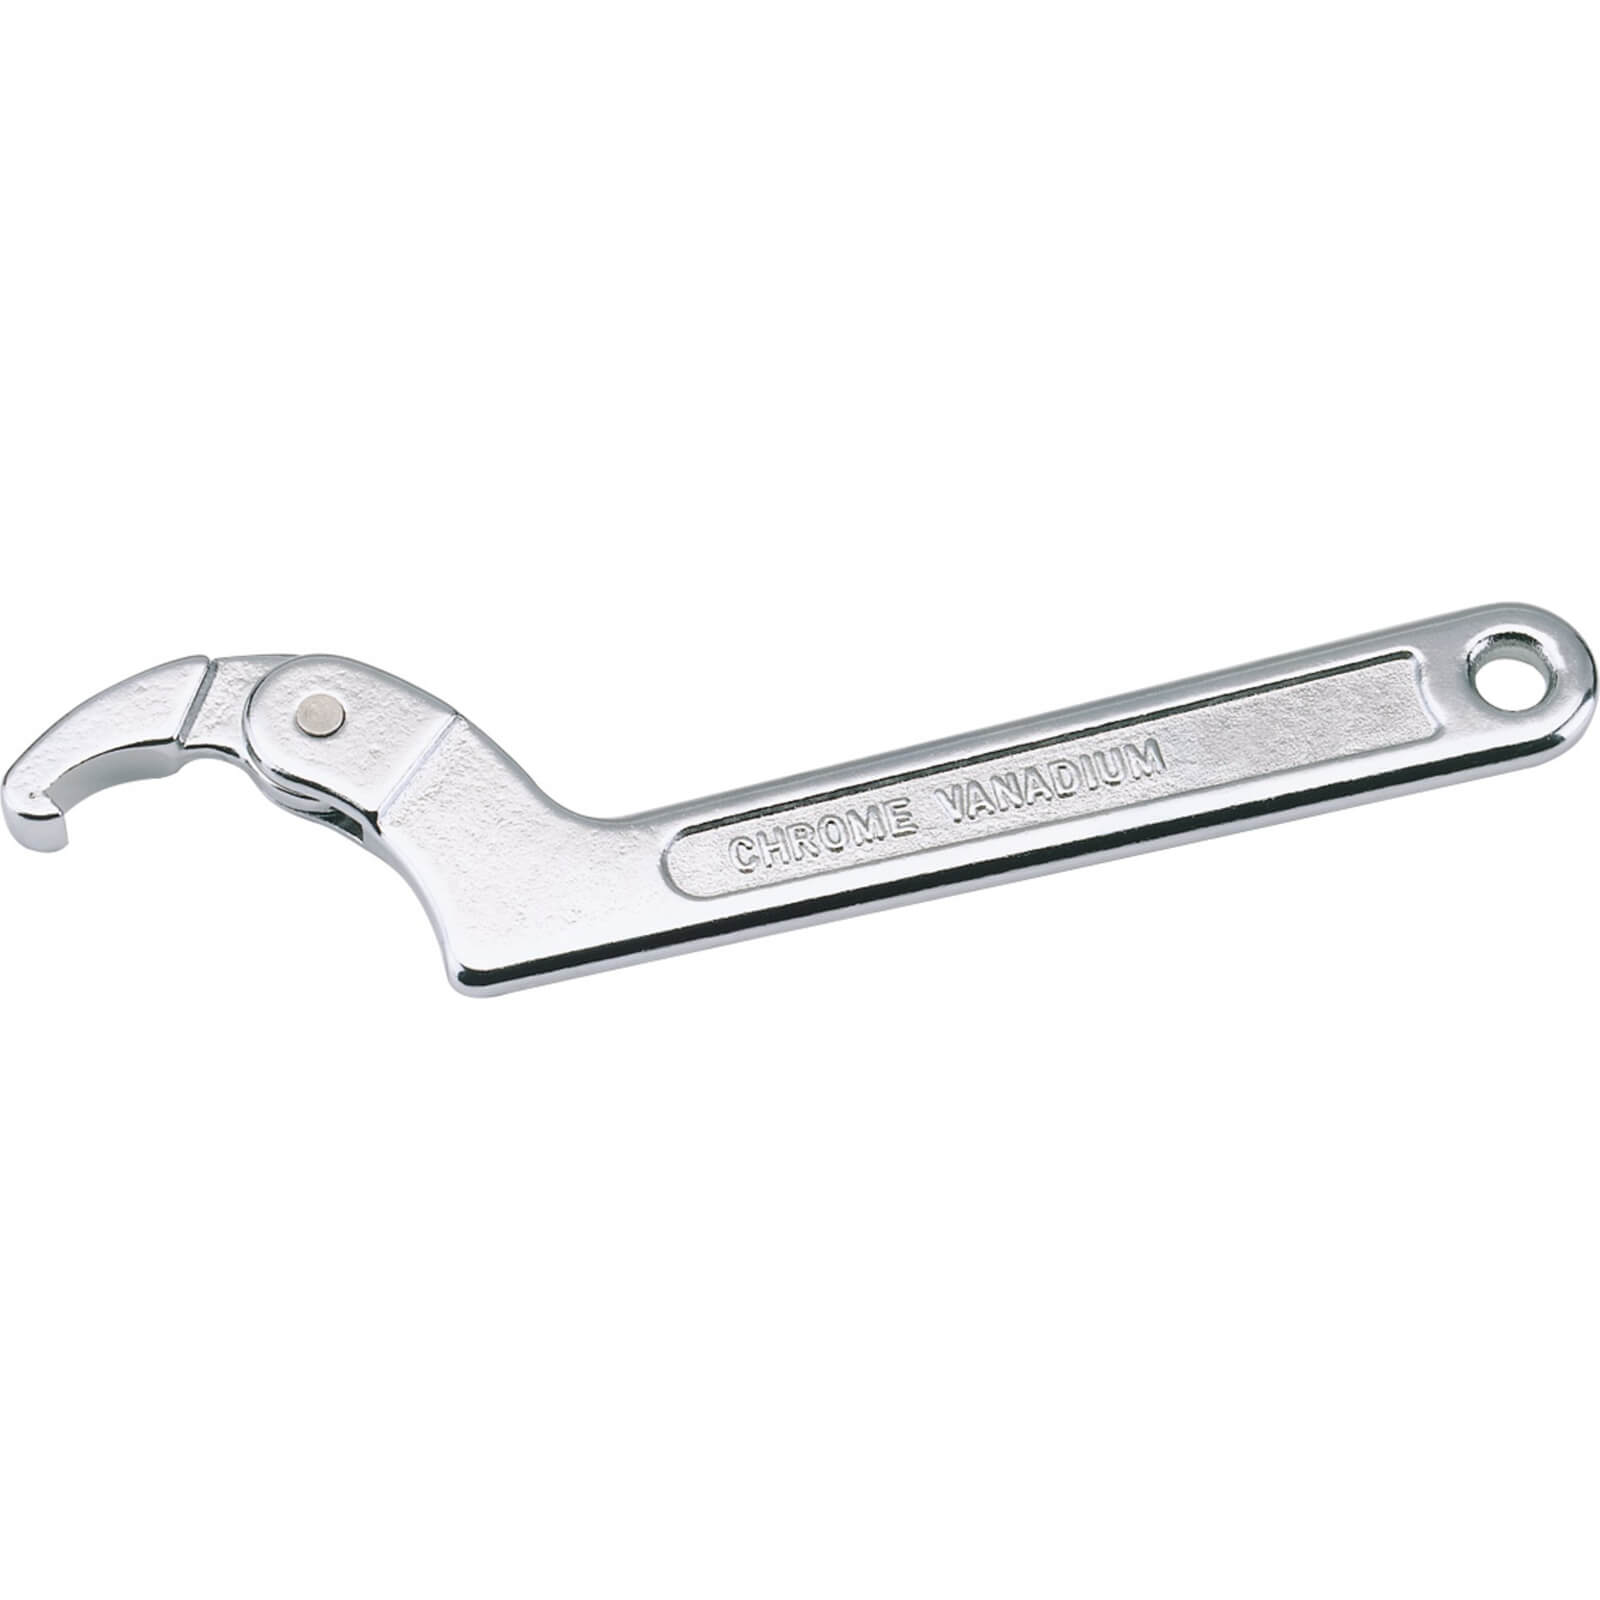 Image of Draper Hook and Pin Spanner 32mm x 76mm